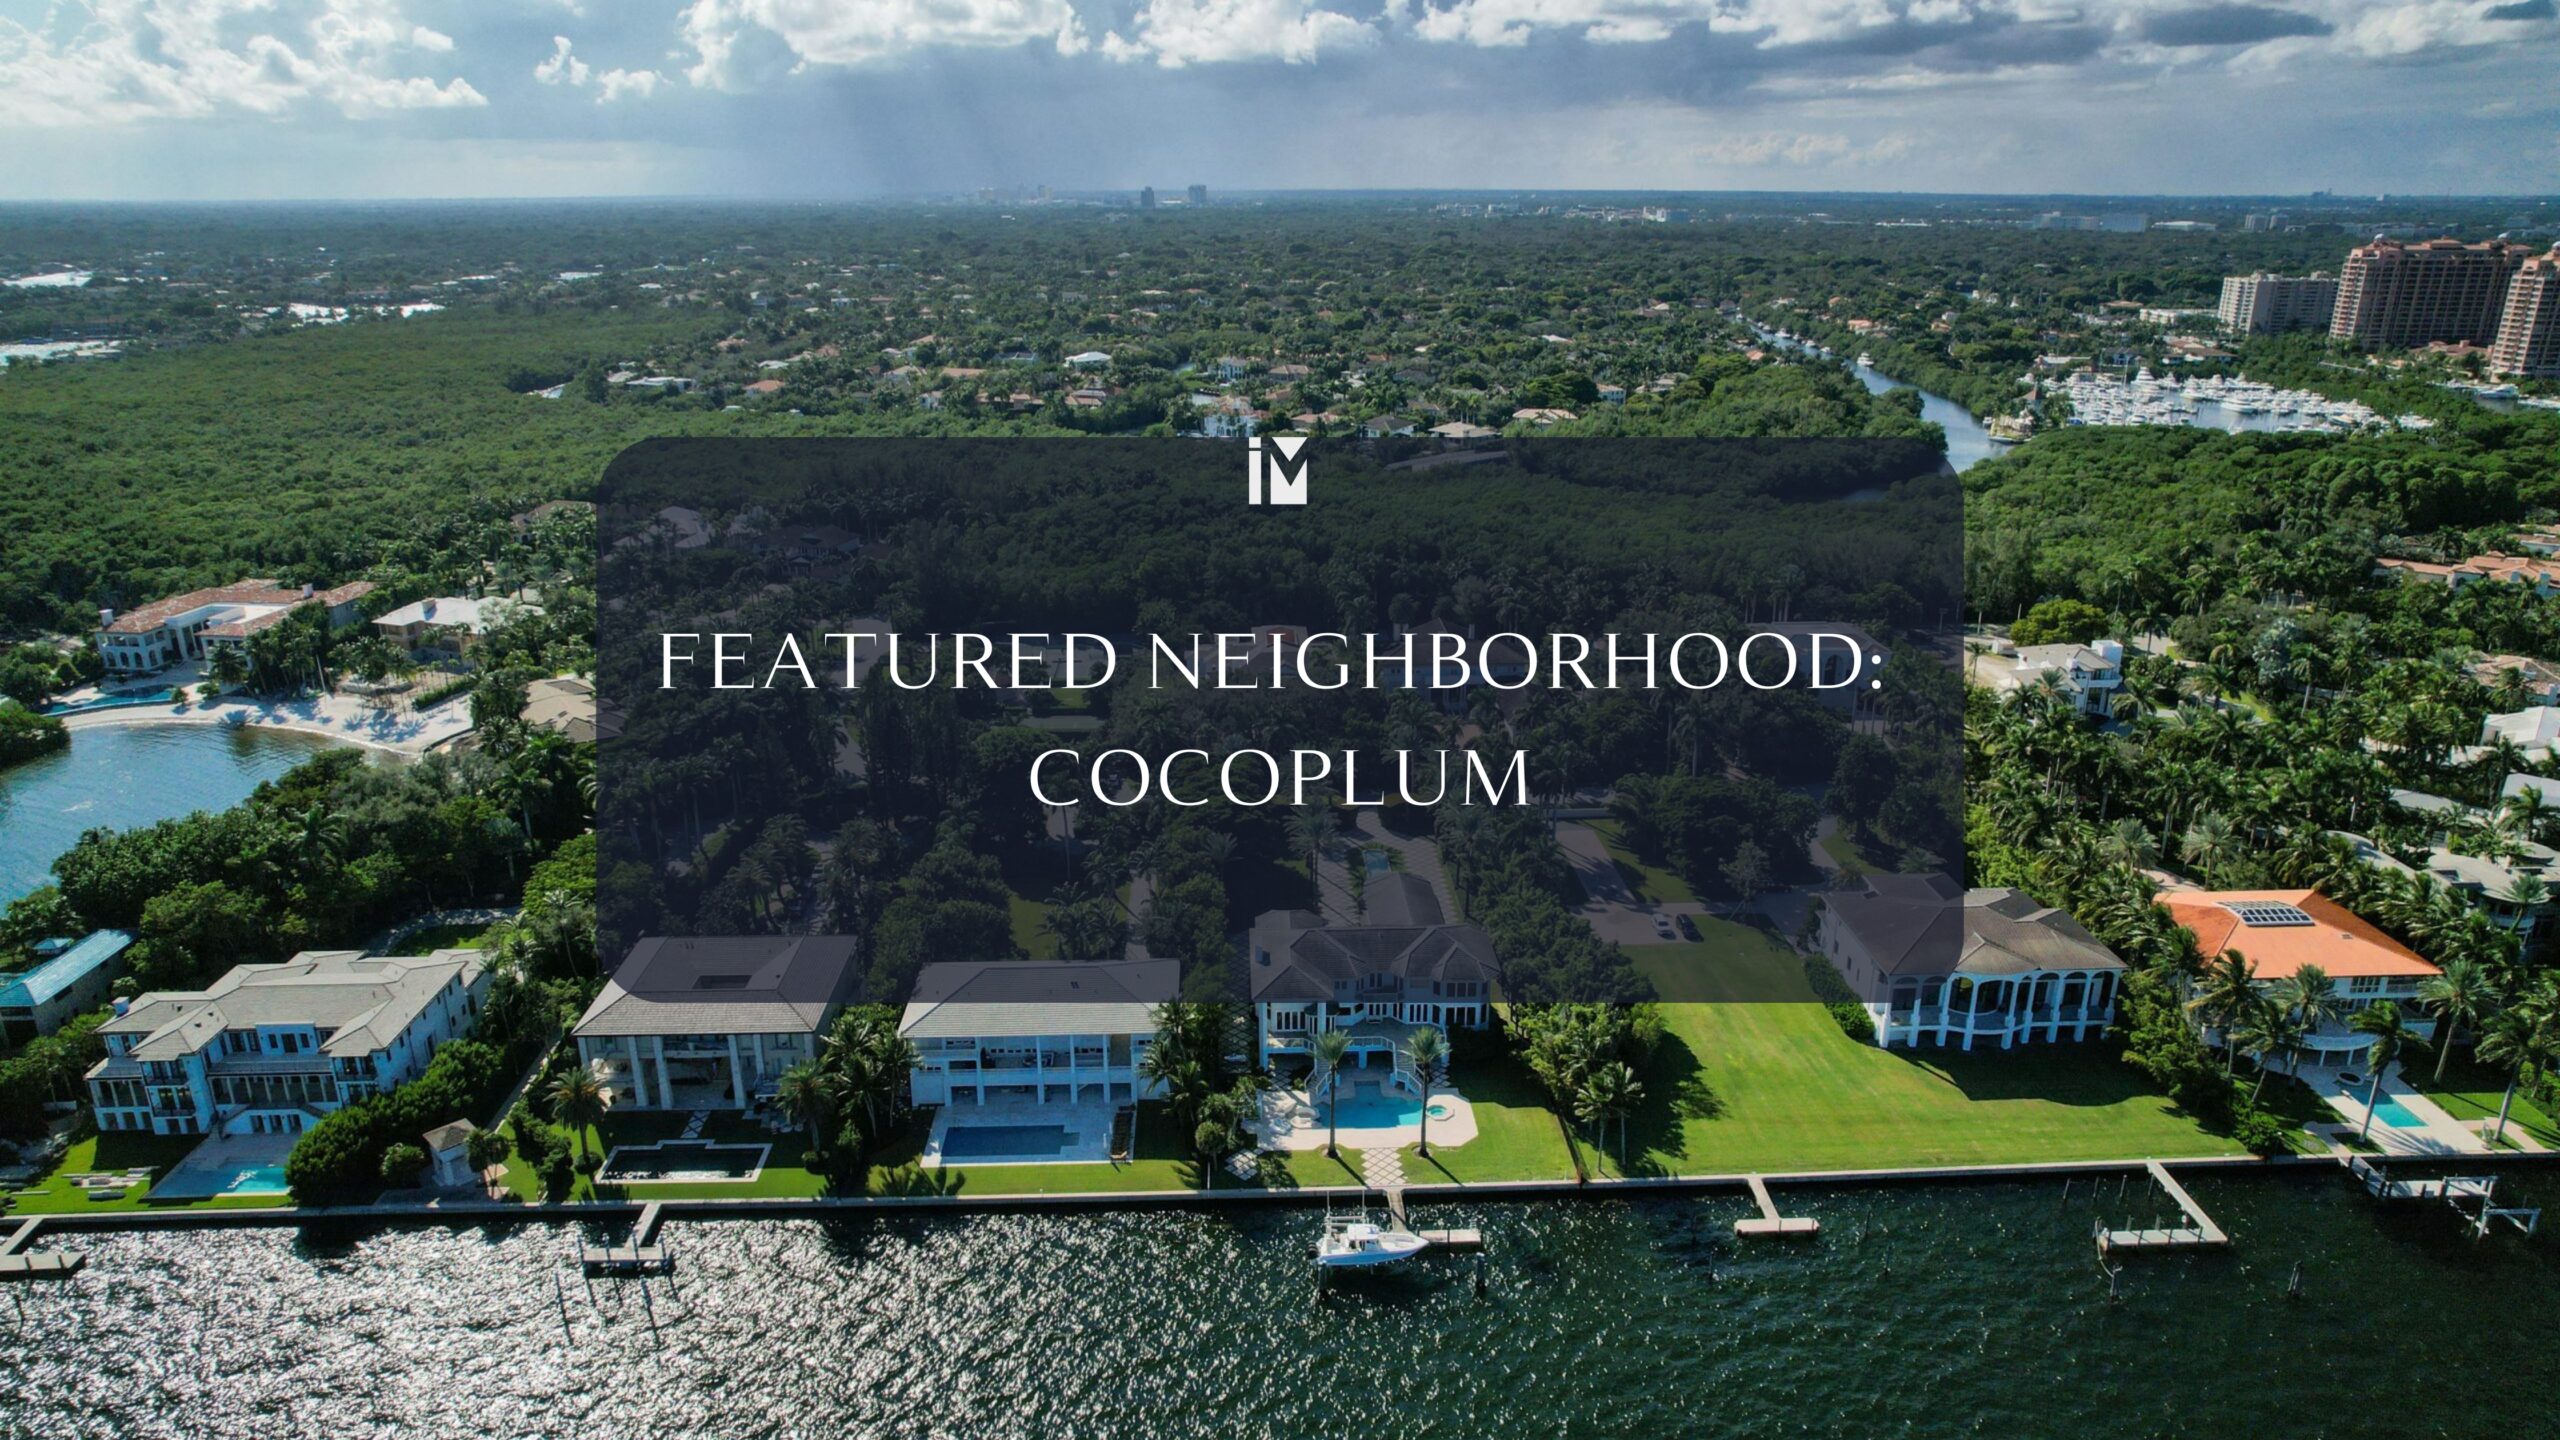 Florida Becomes The Most Valuable Housing Market In The U.S.